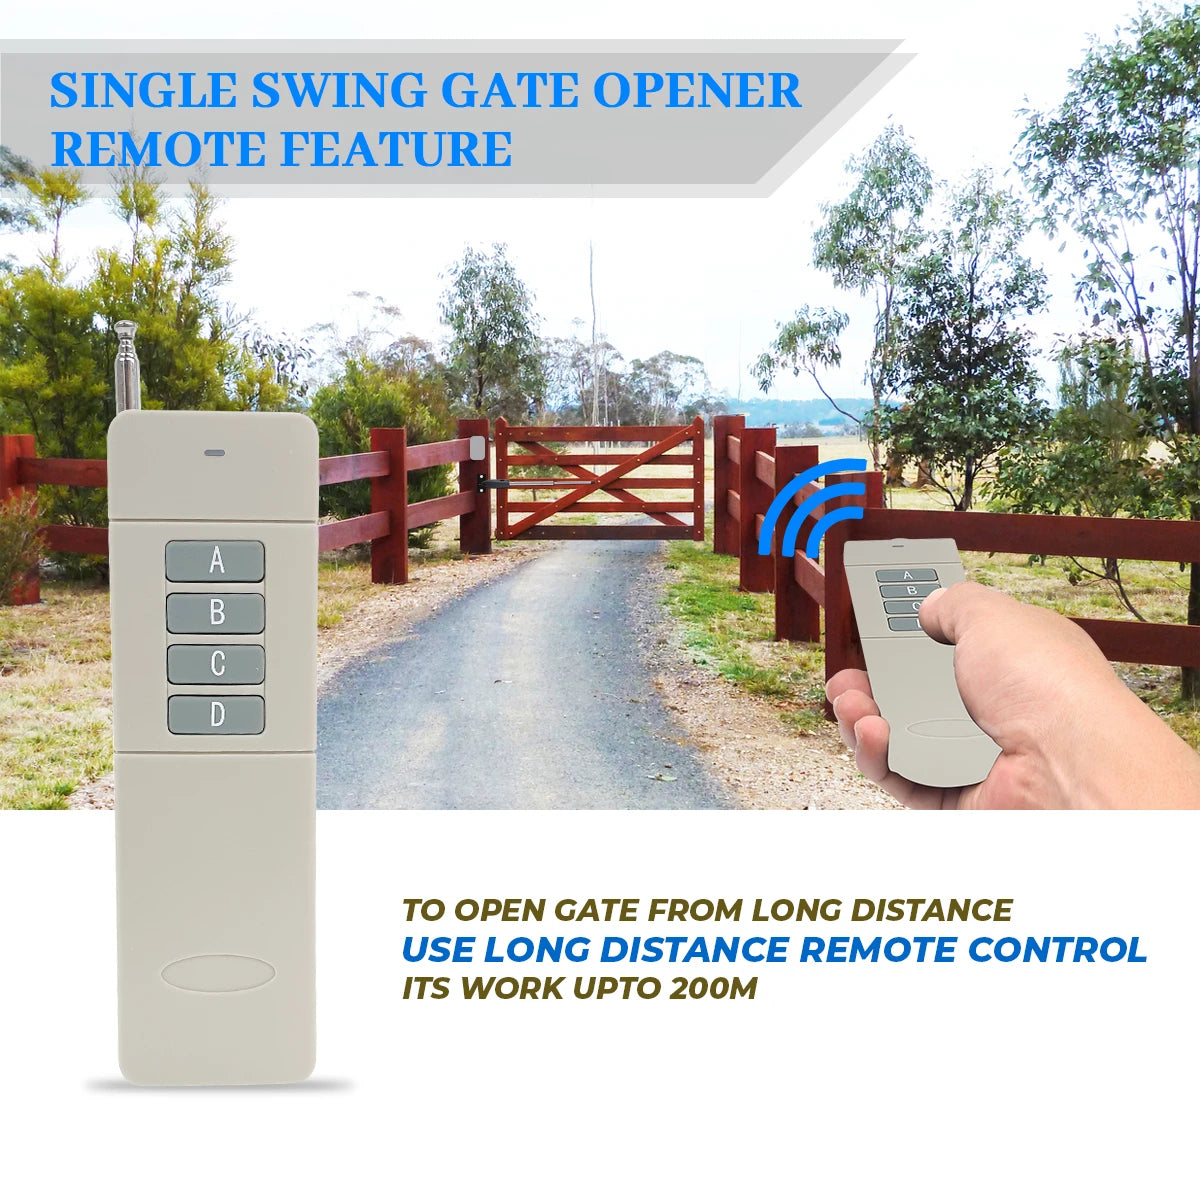 Full Solar Powered Automatic Single Swing Gate Opener Kit with 30W Solar Panel & 9AH Battery